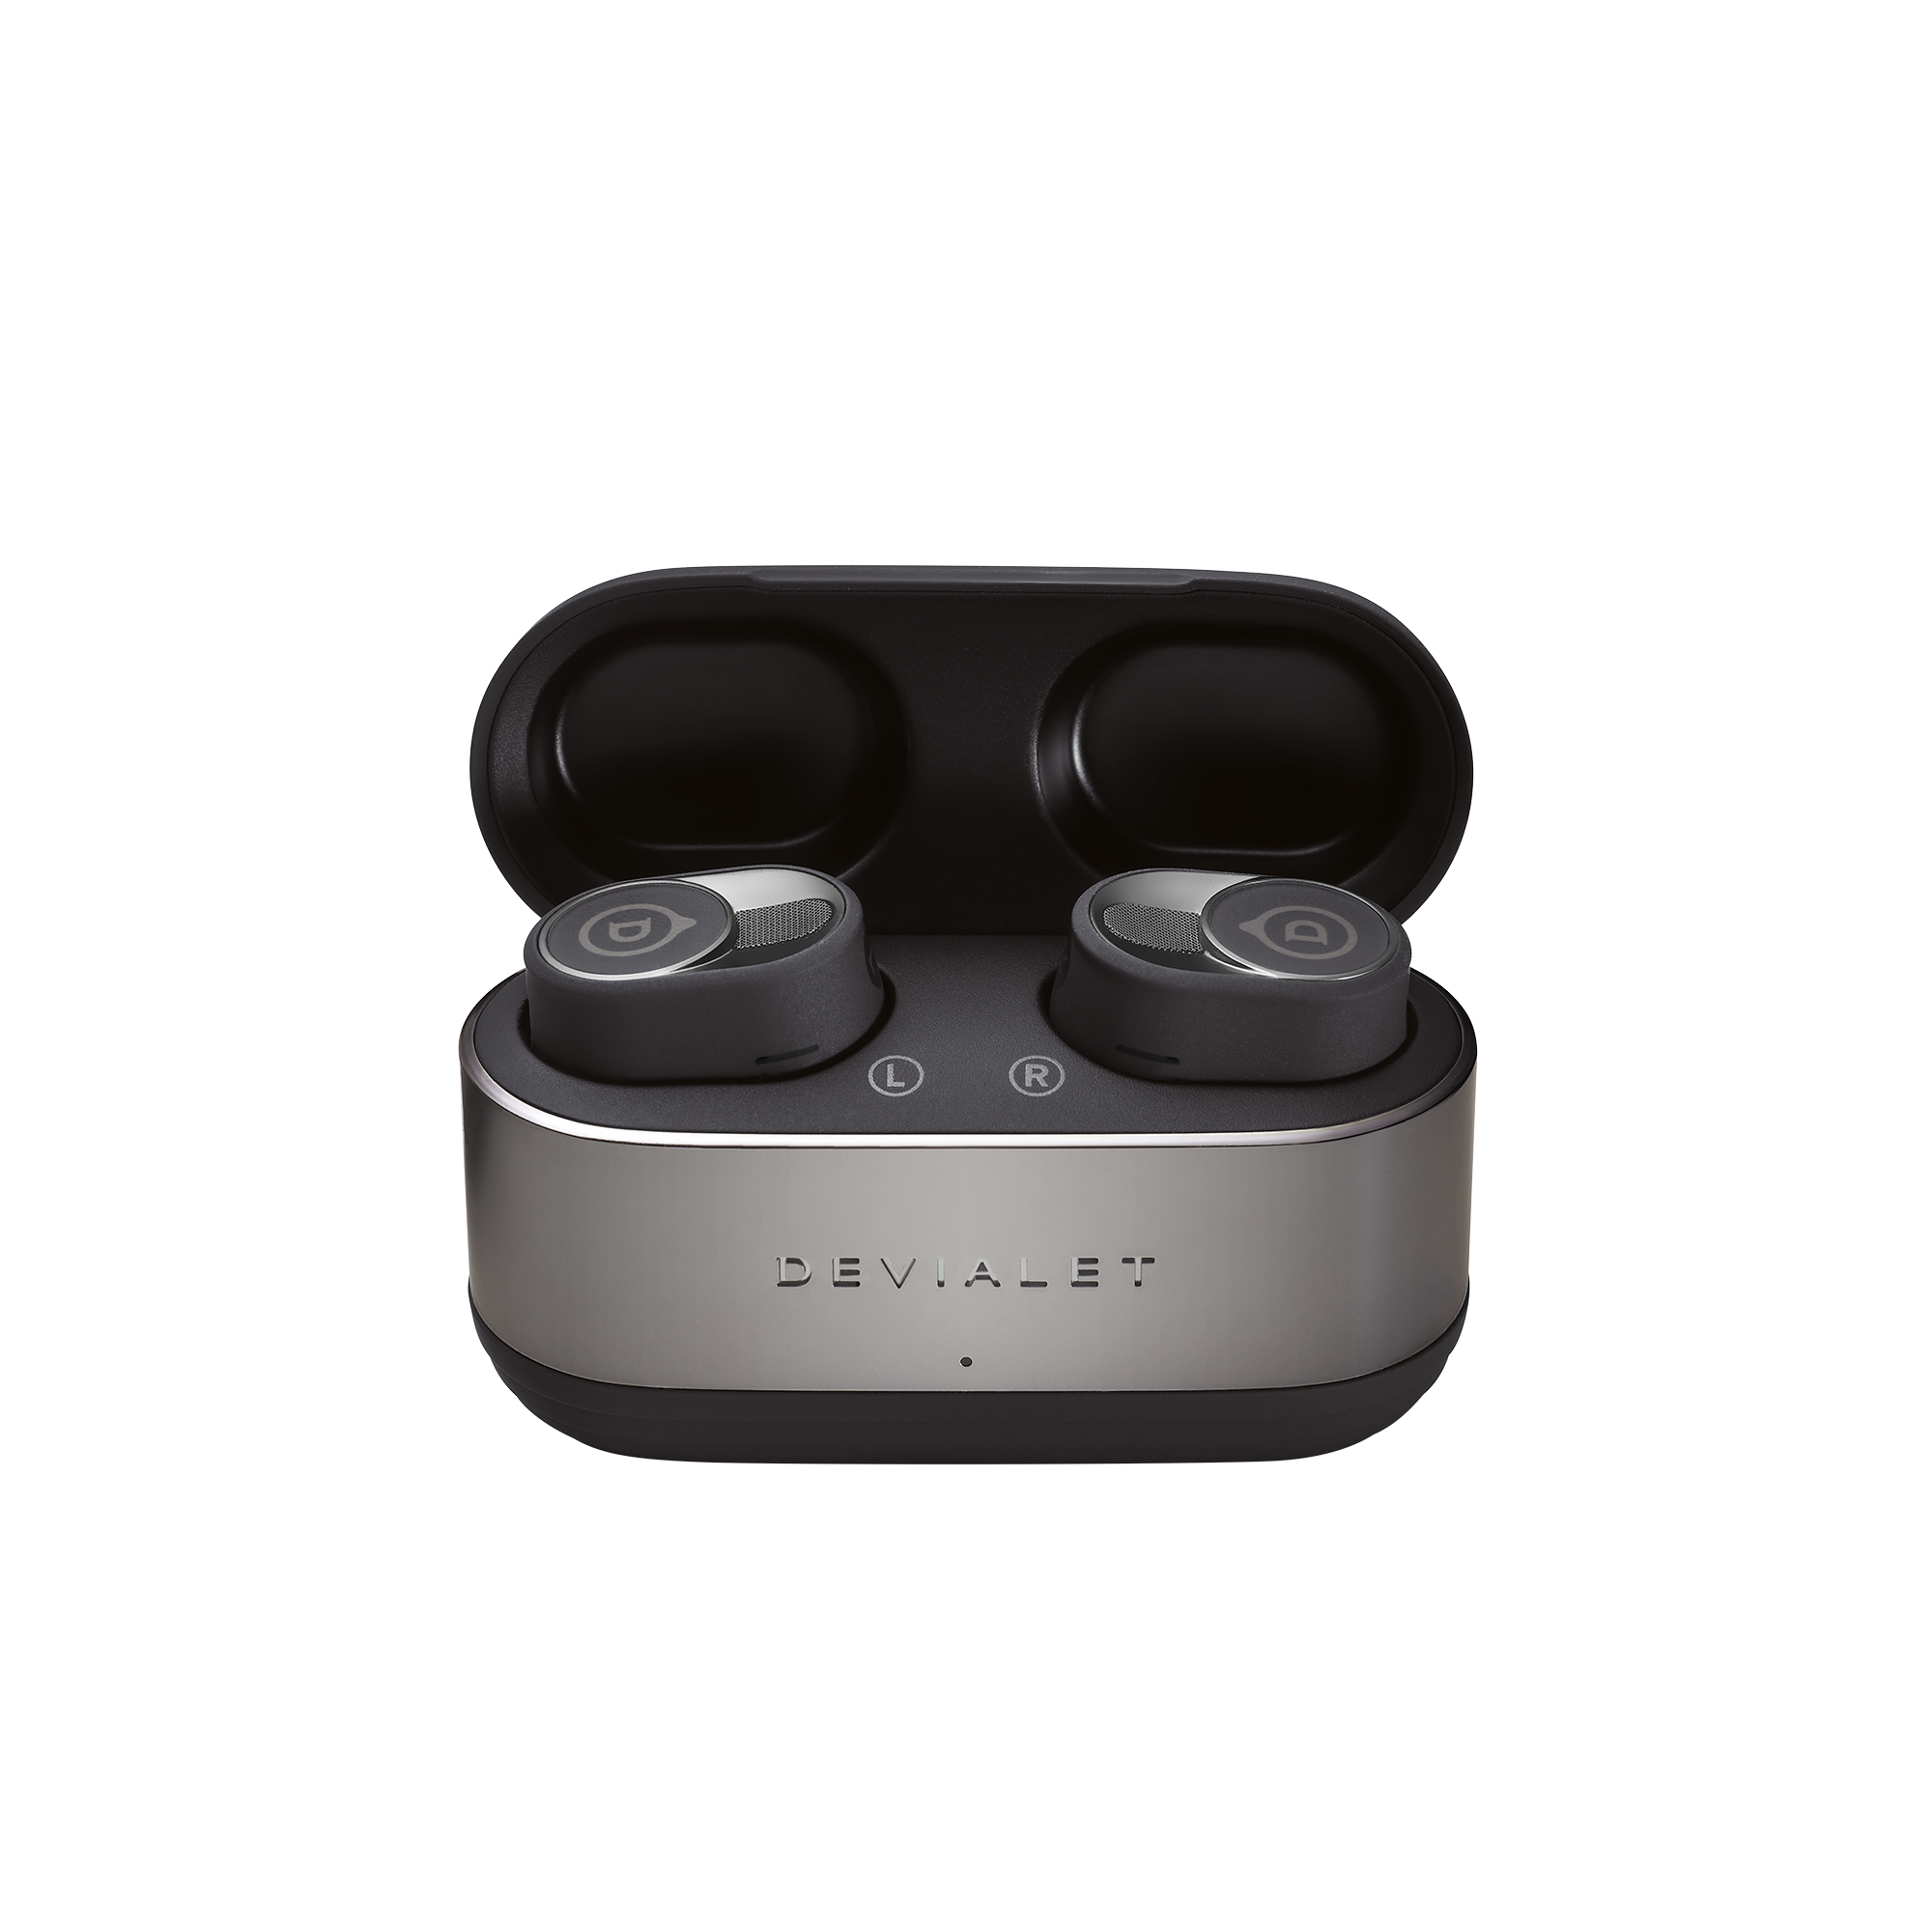 The Devialet Gemini 2 is here 